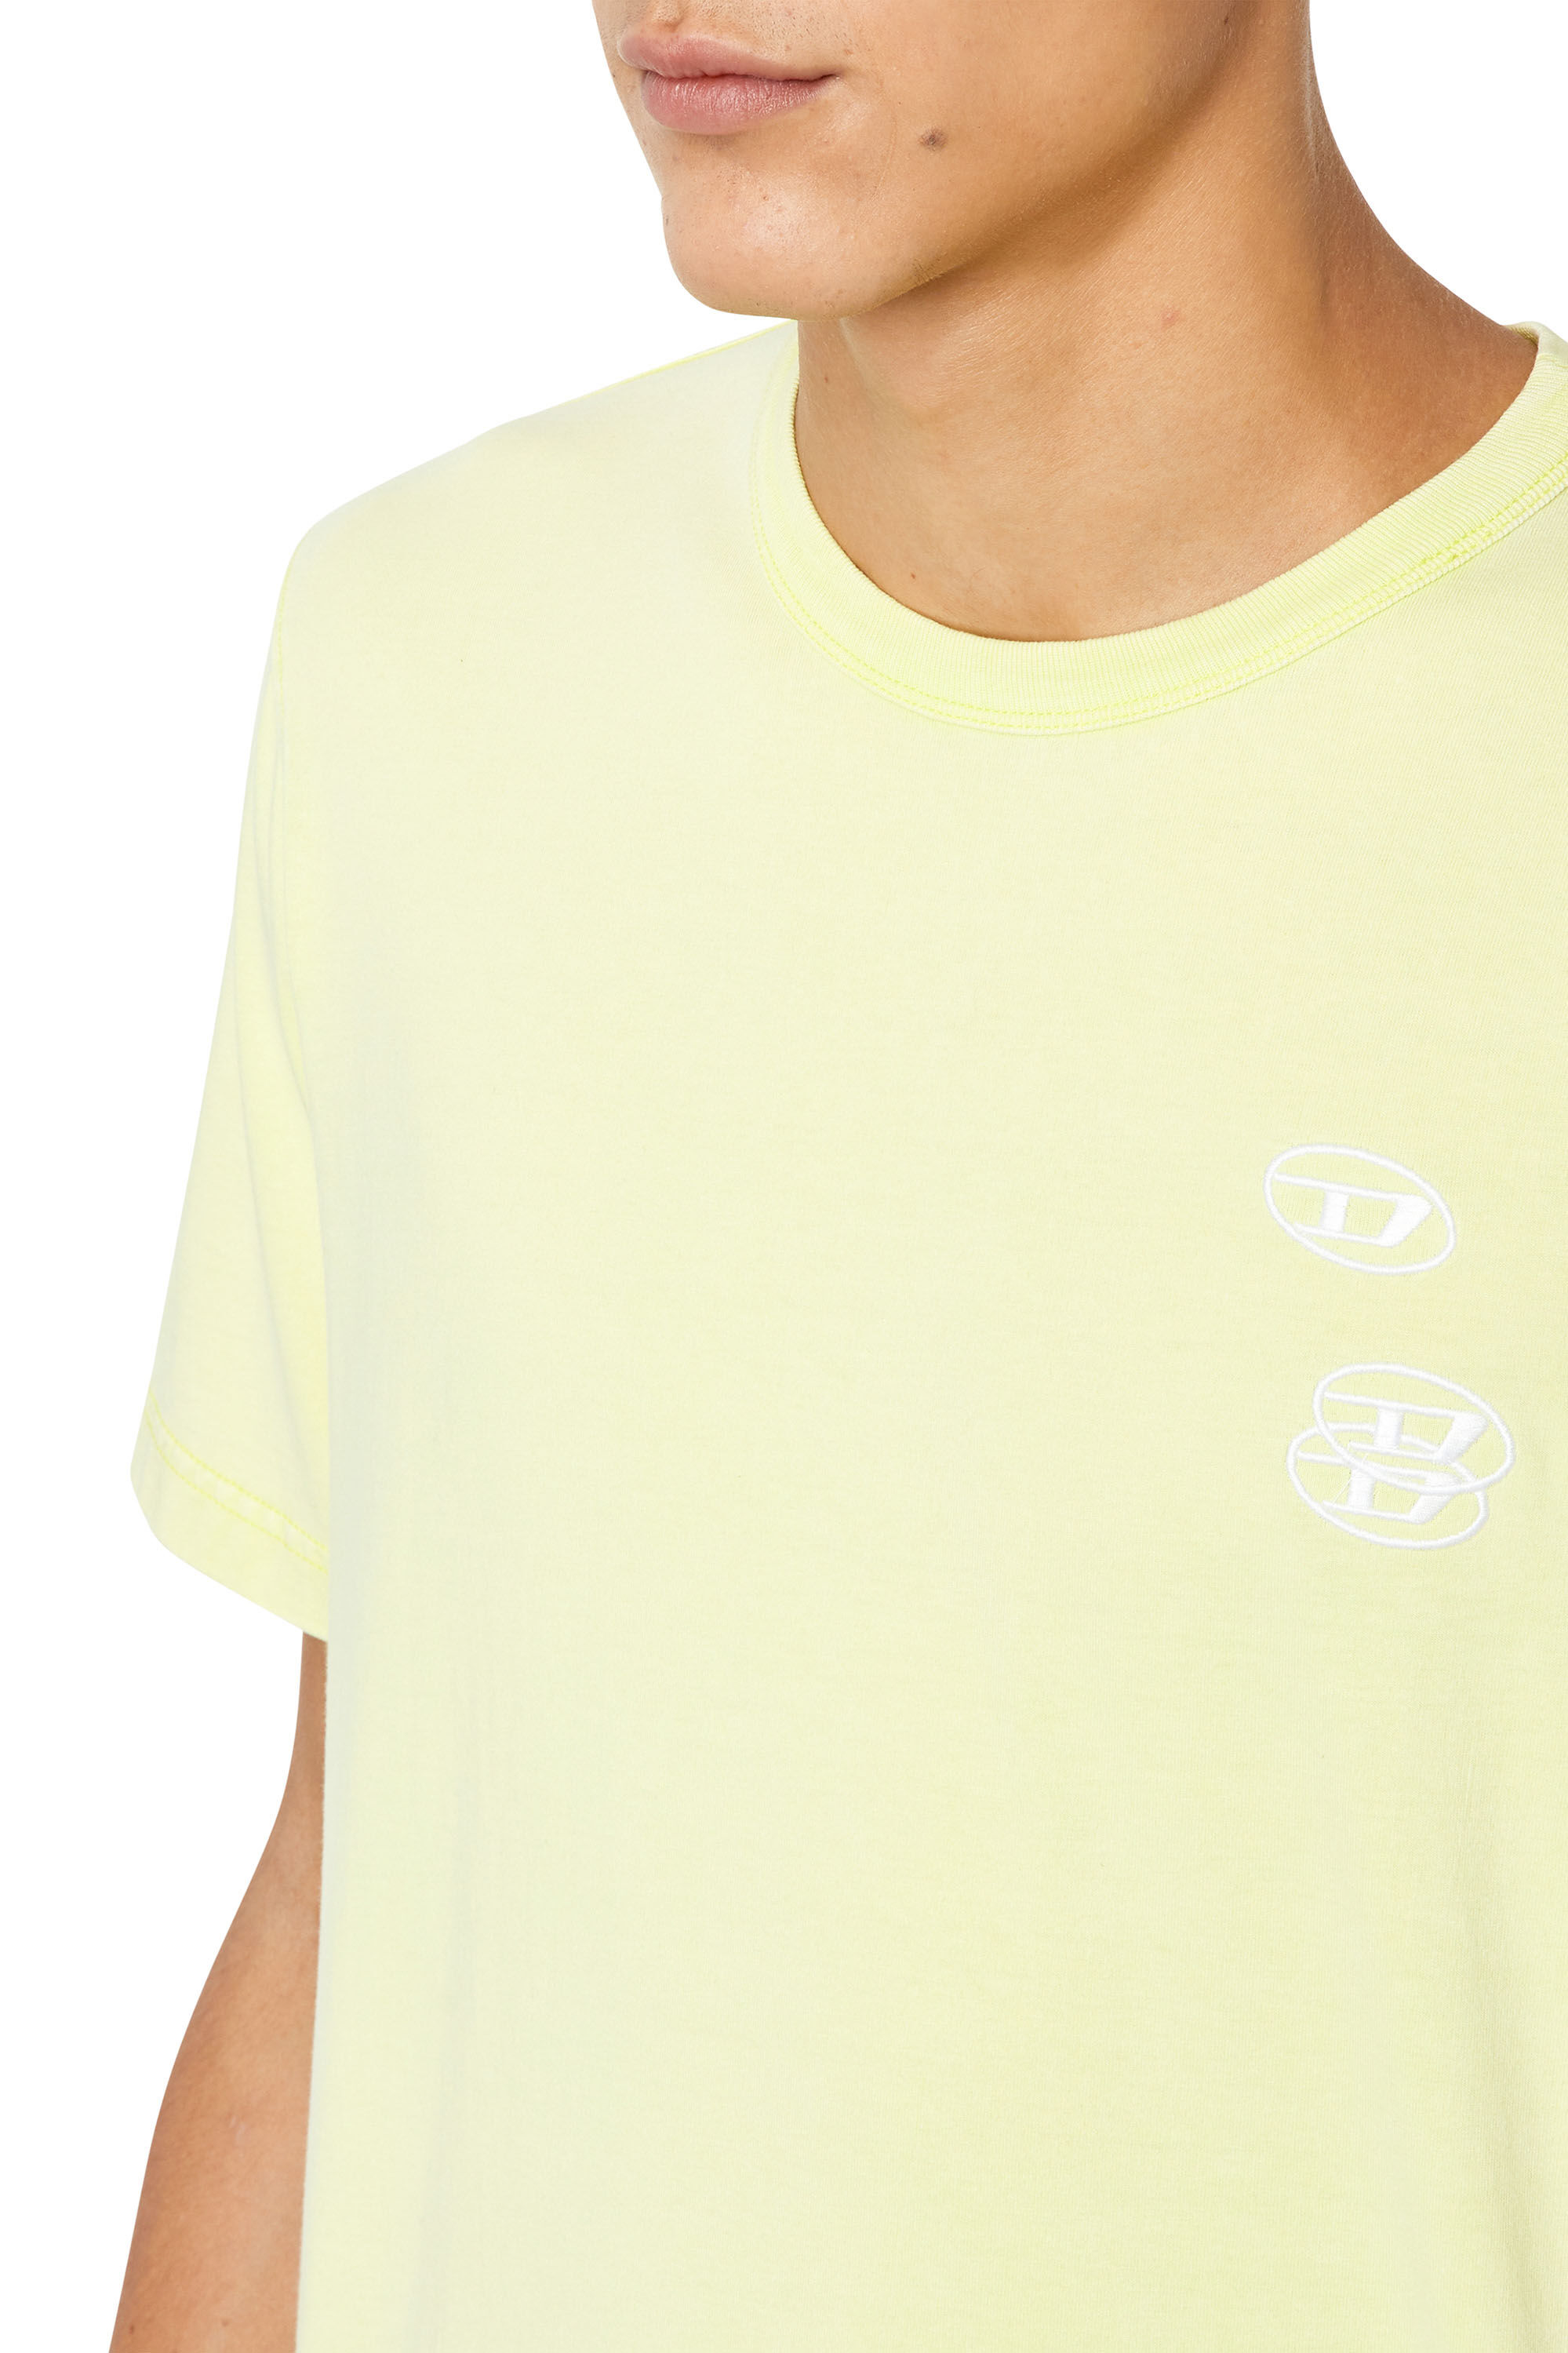 Diesel - T-JUST-G14, Yellow Fluo - Image 6